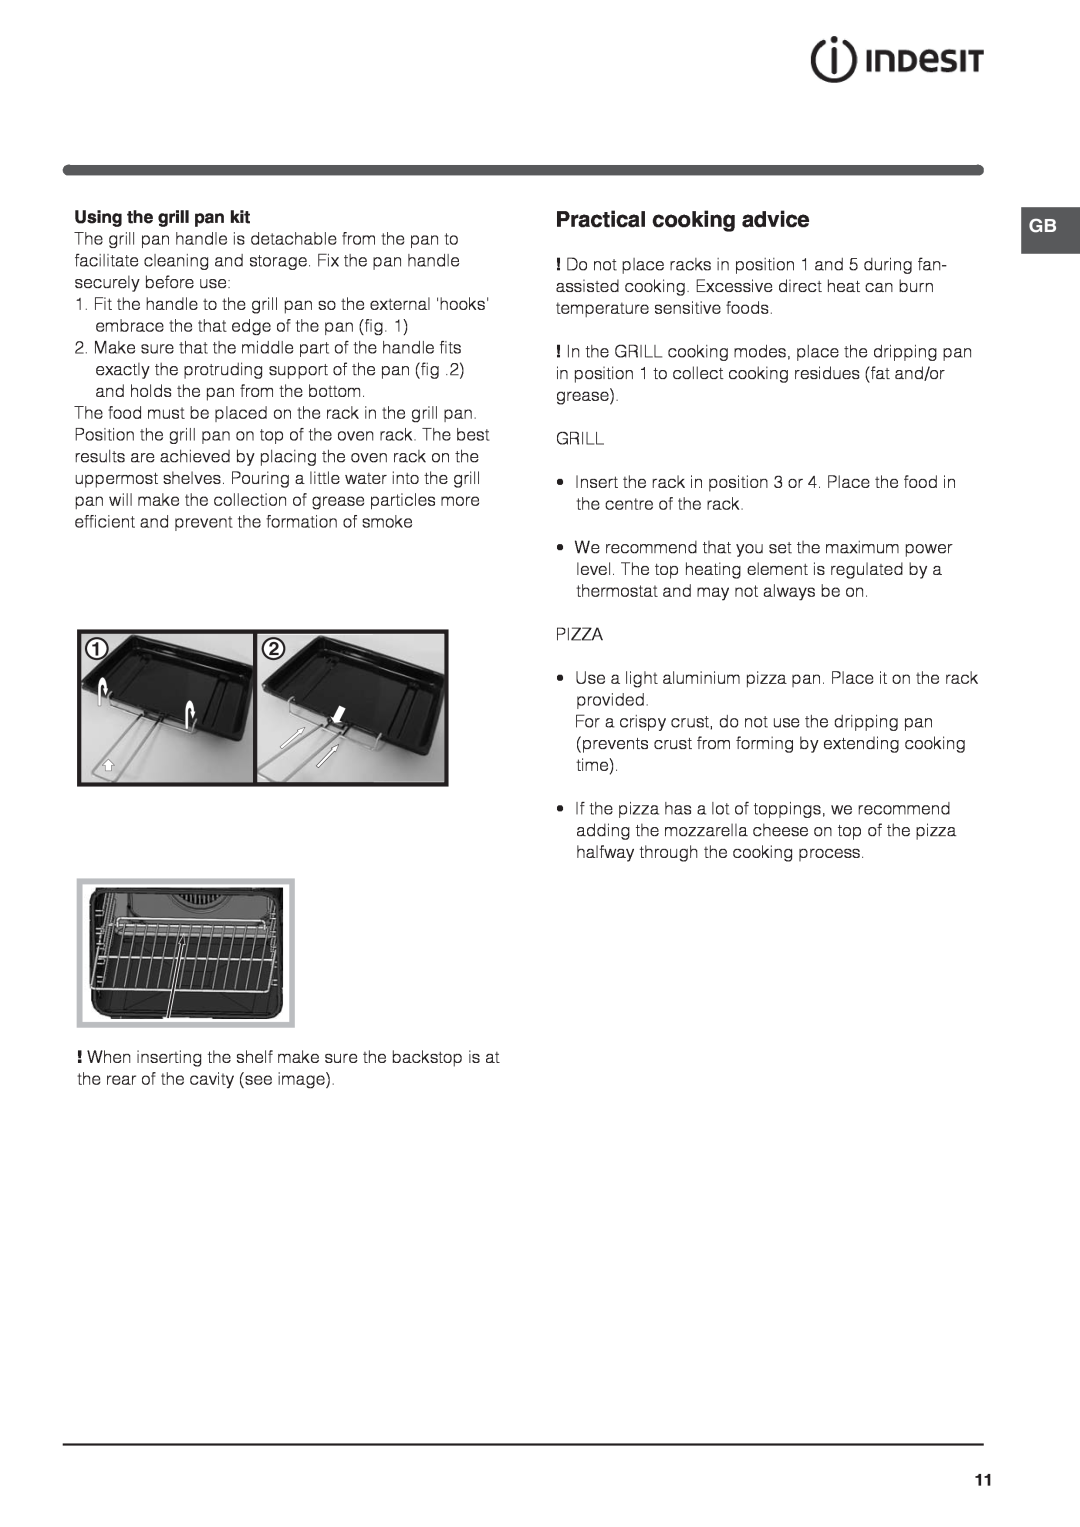 Indesit IS60C1 S manual Practical cooking advice, Using the grill pan kit 